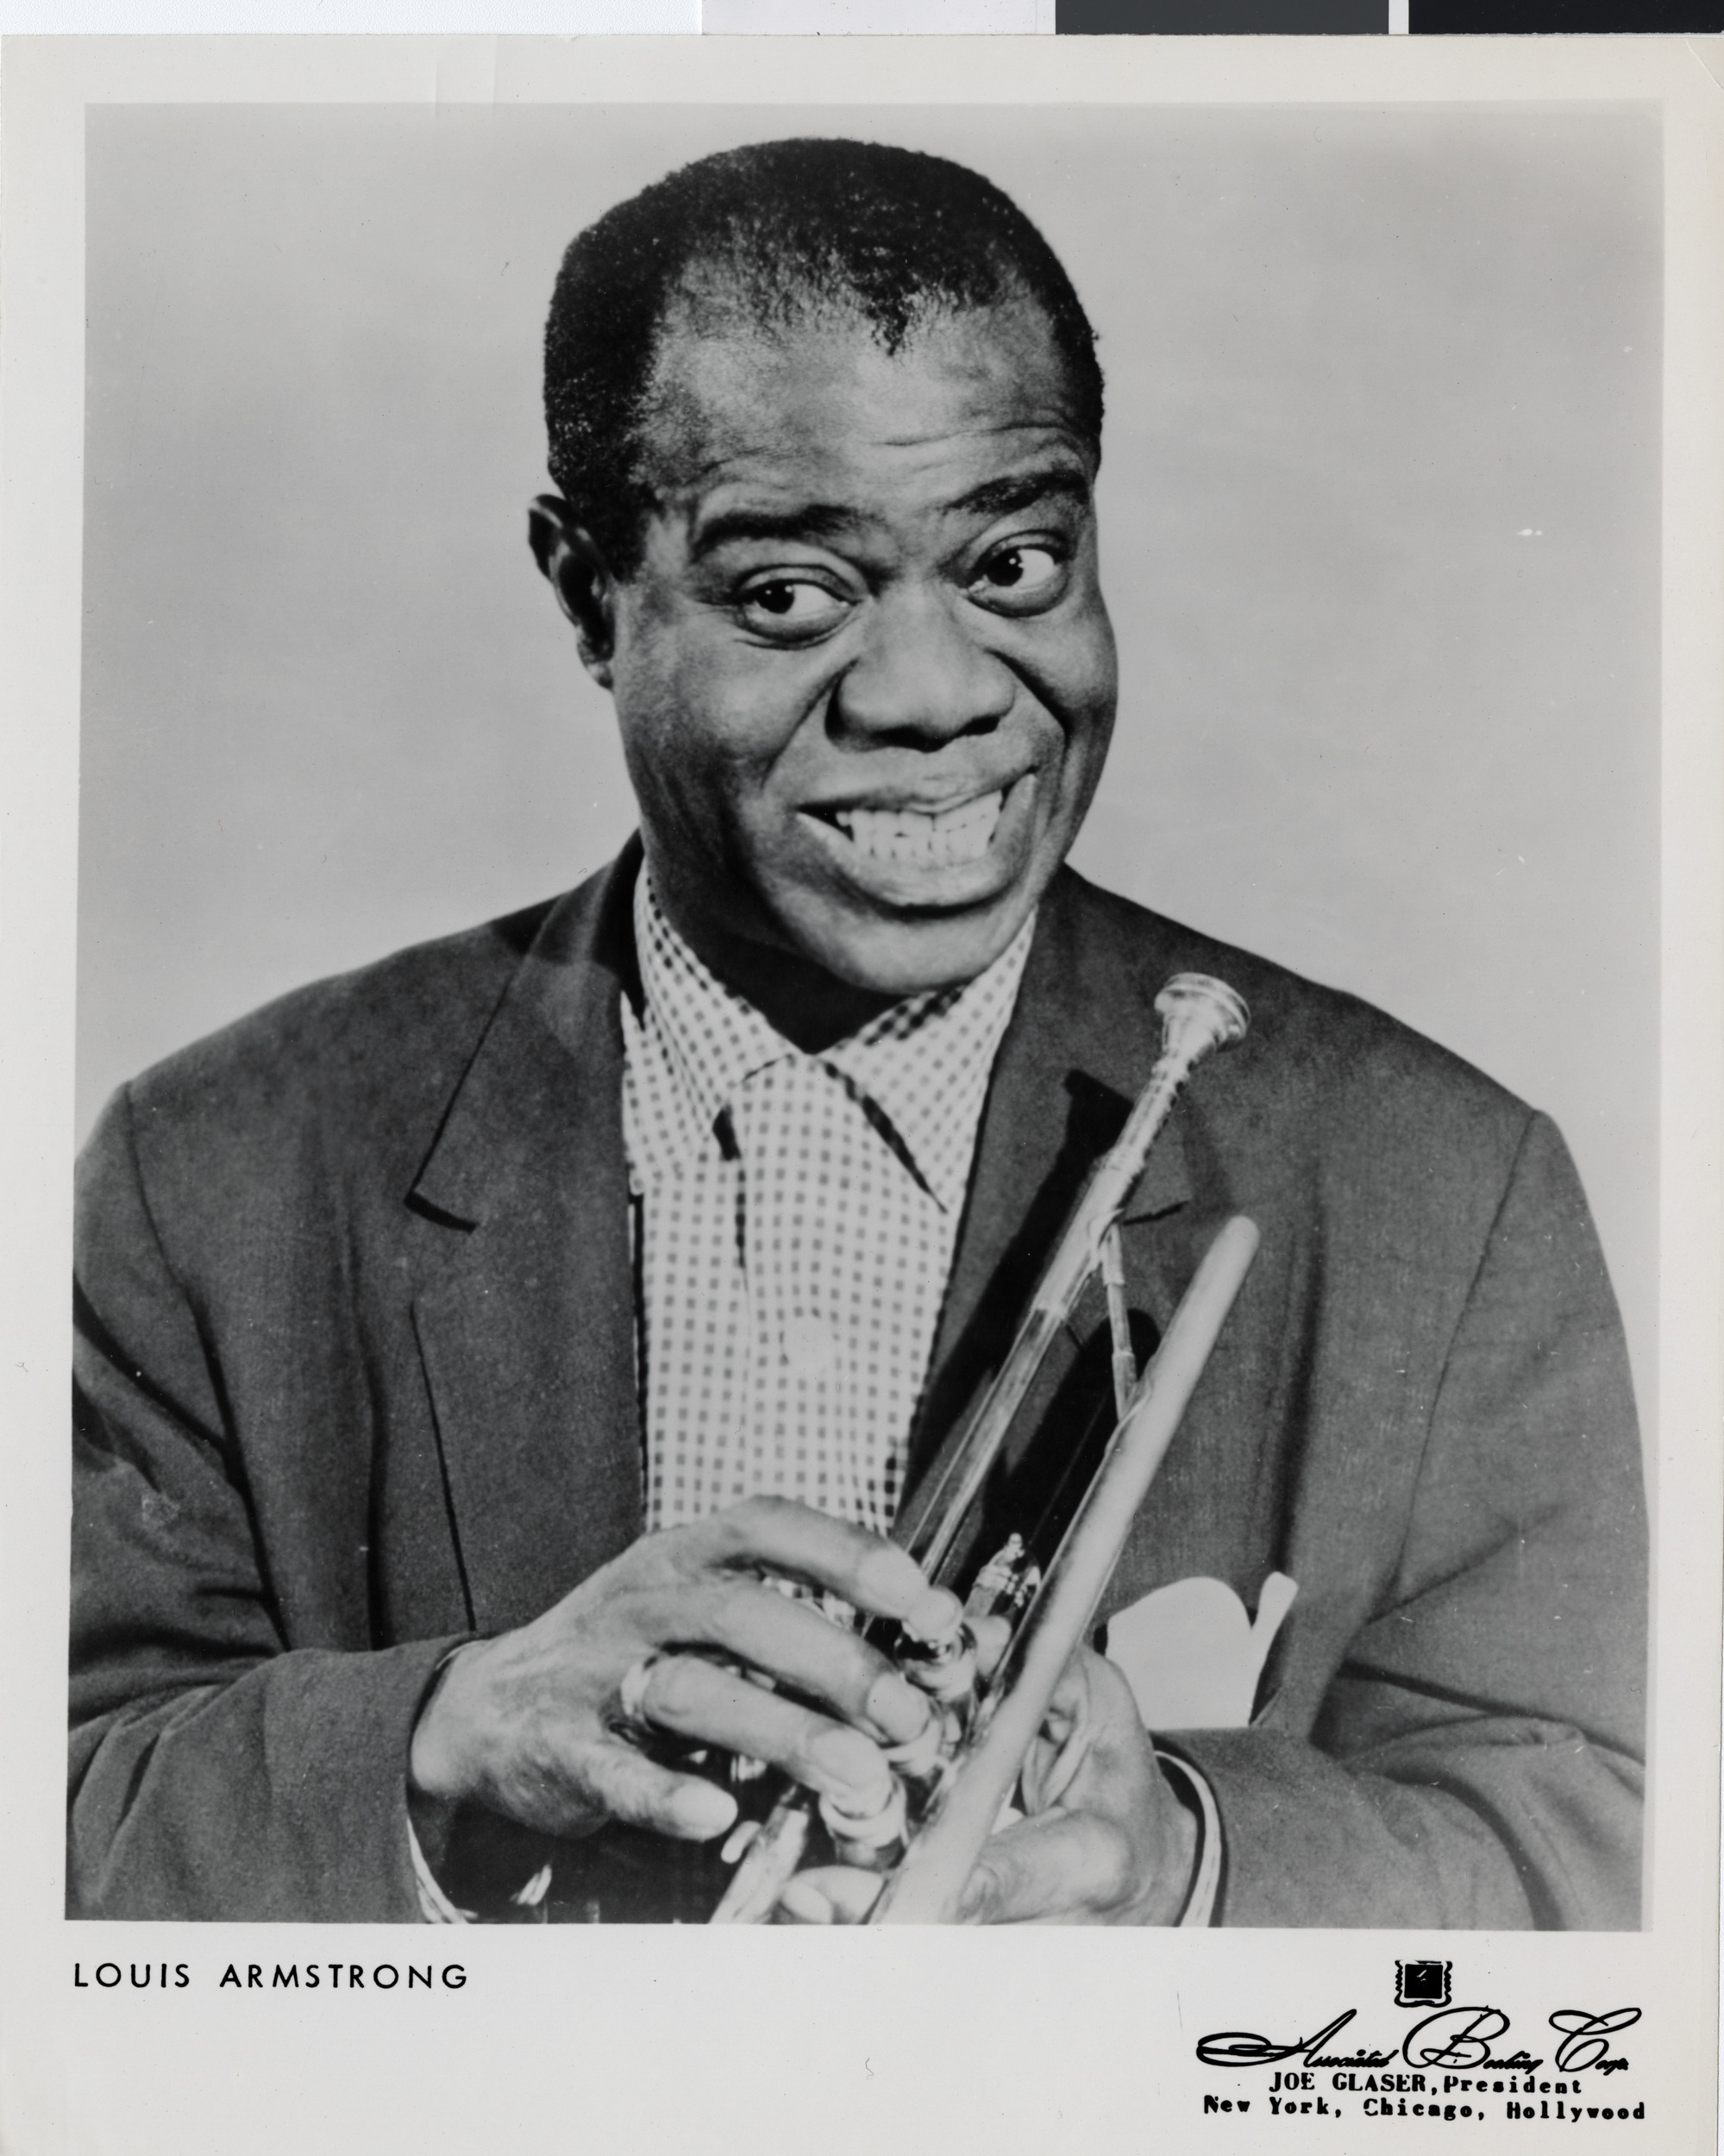 Publicity photograph of Louis Armstrong